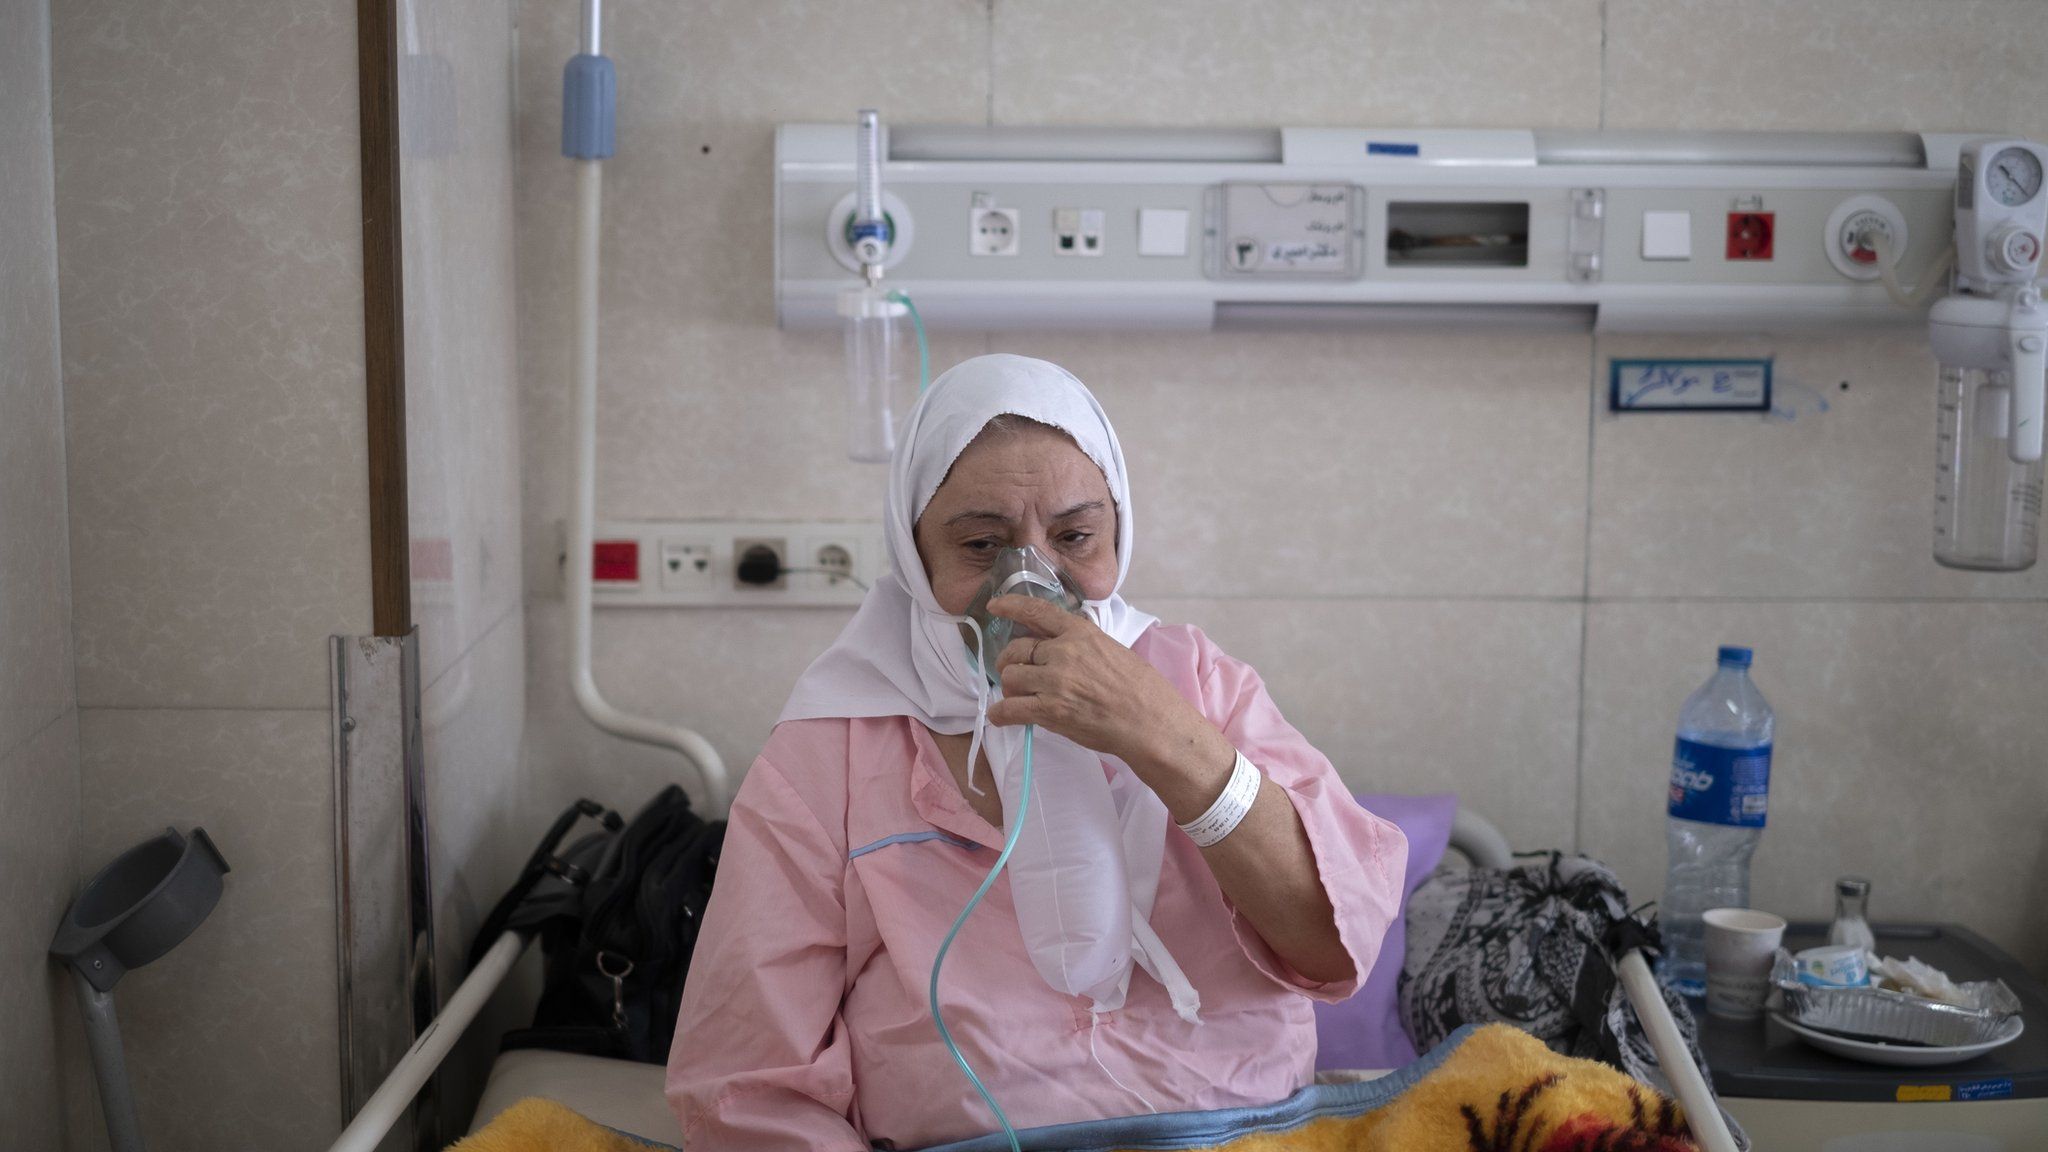 An Iranian elderly woman who is infected by Covid-19 uses oxygen while sitting on a hospital bed in the holy city of Qom in Iran, 10 March 2022.